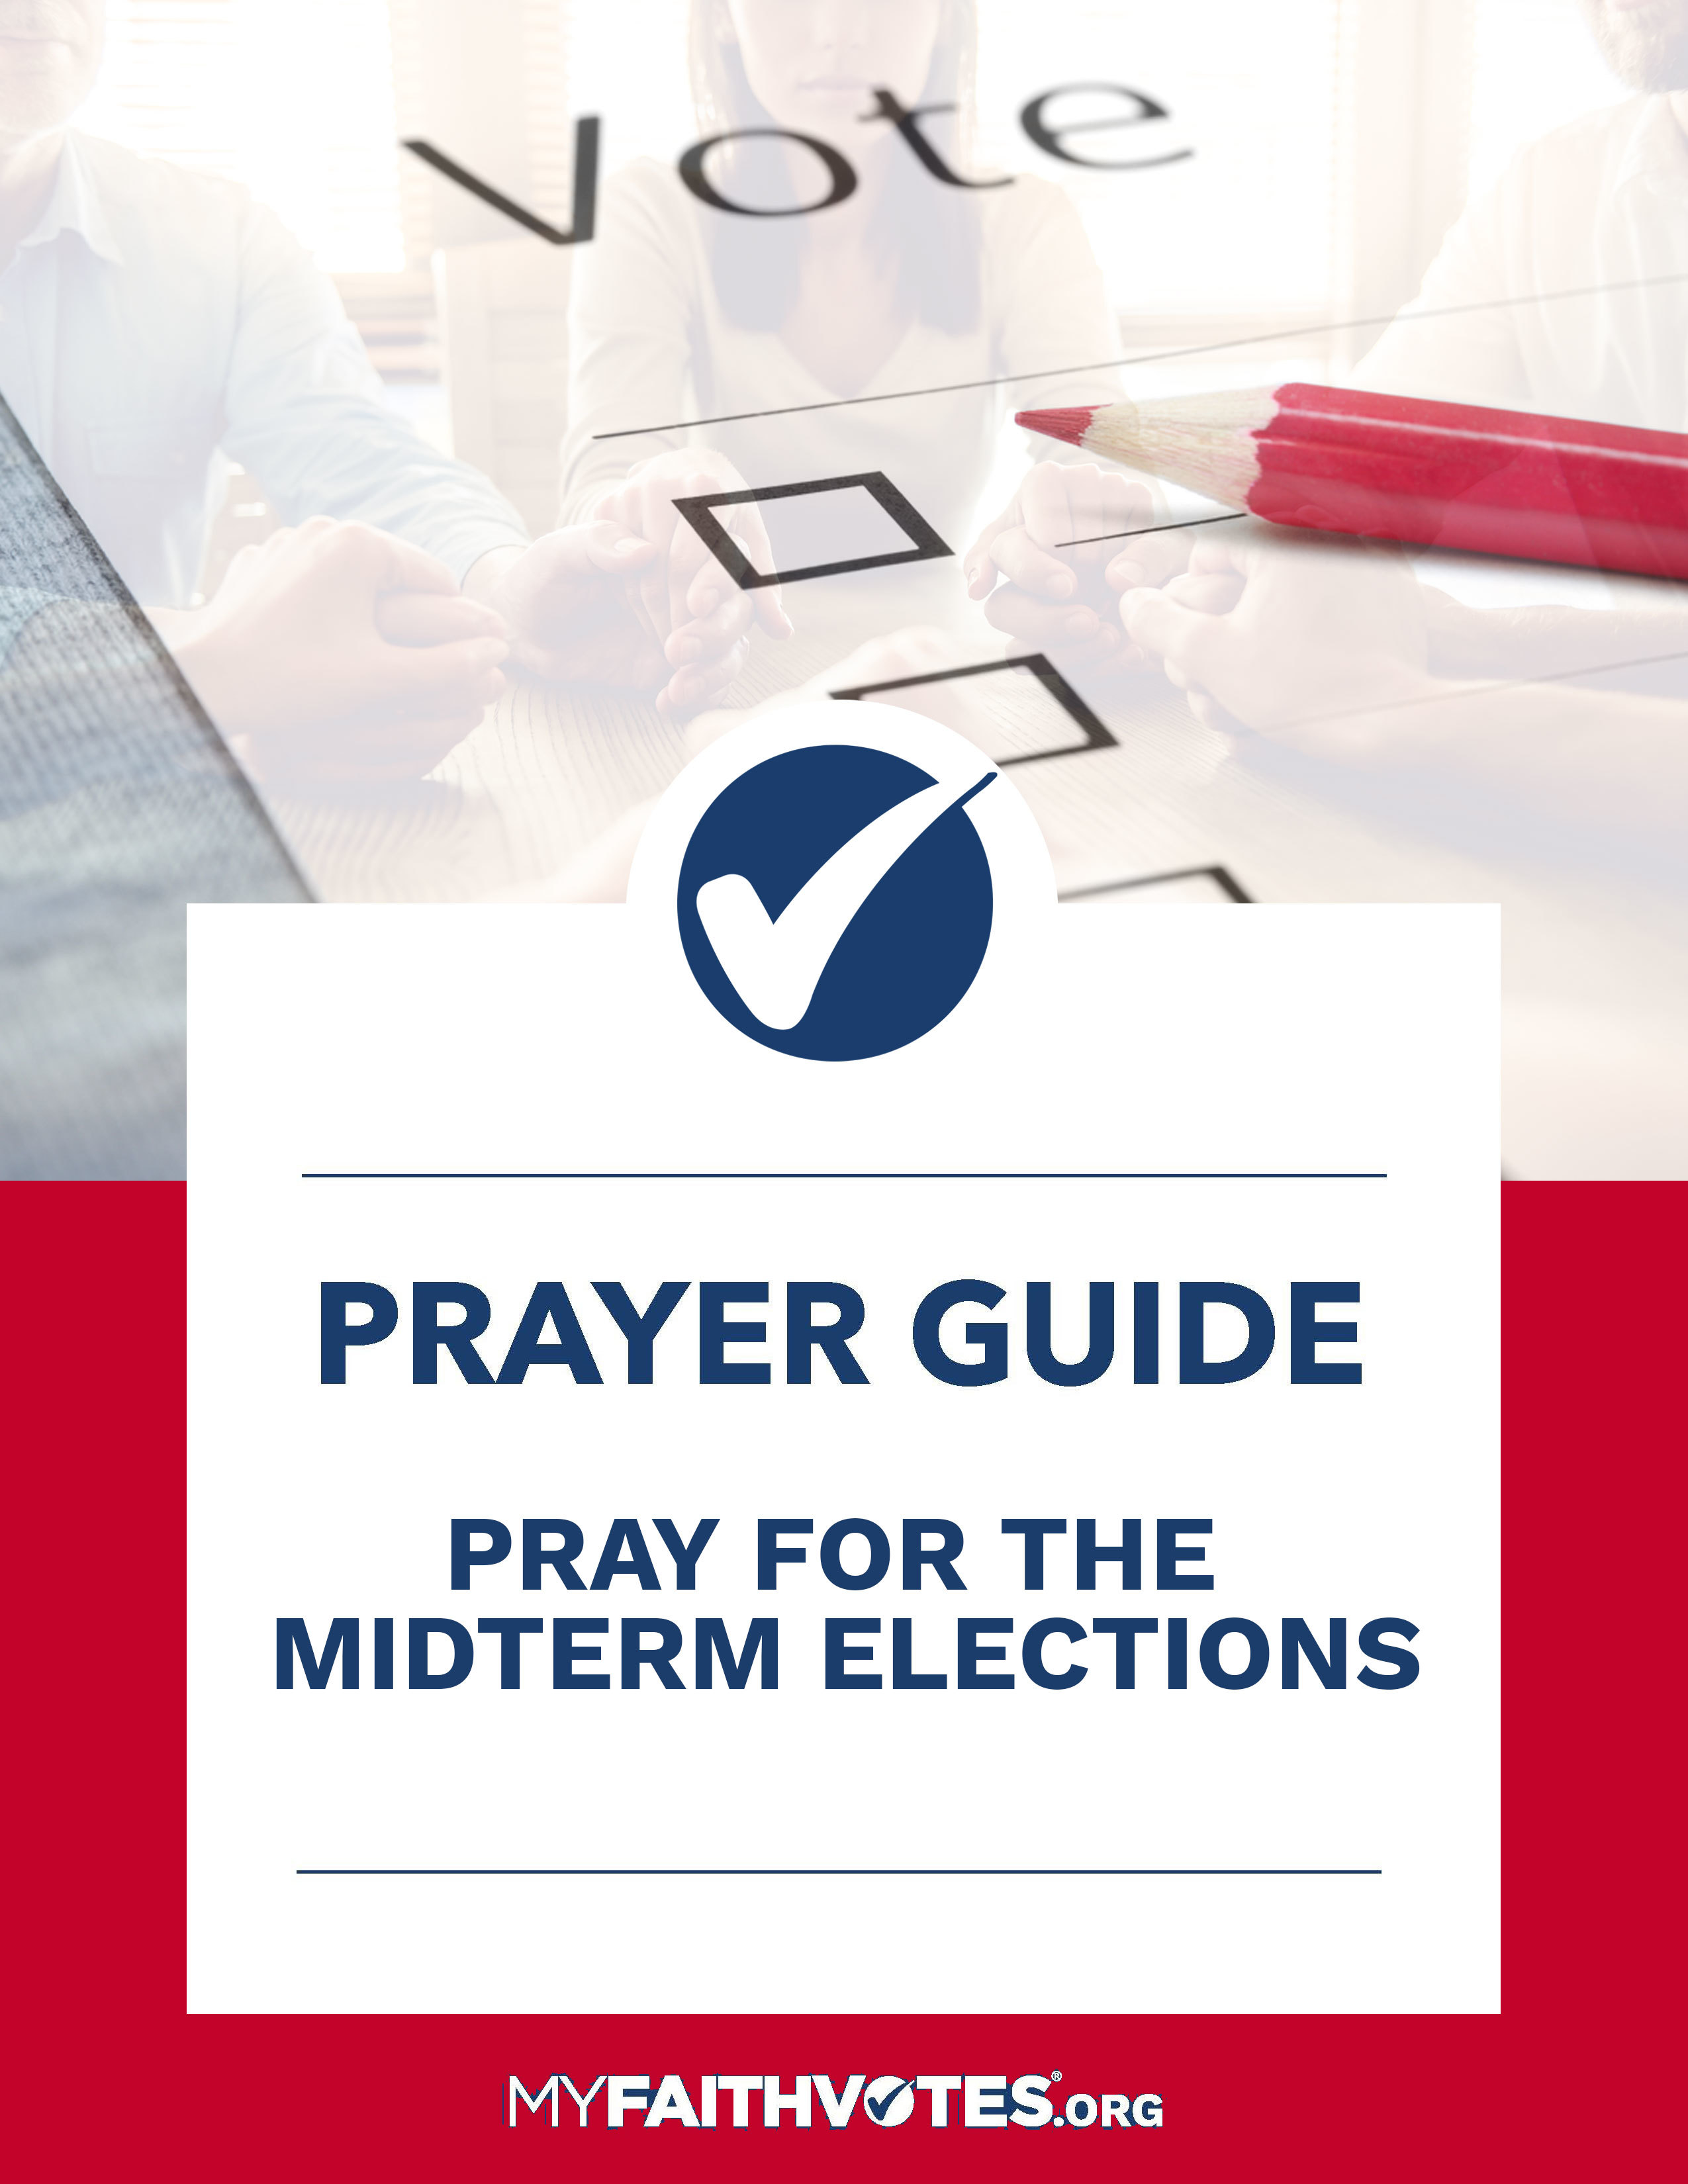 My Faith Votes Get your 2022 Midterm Elections Prayer Guide